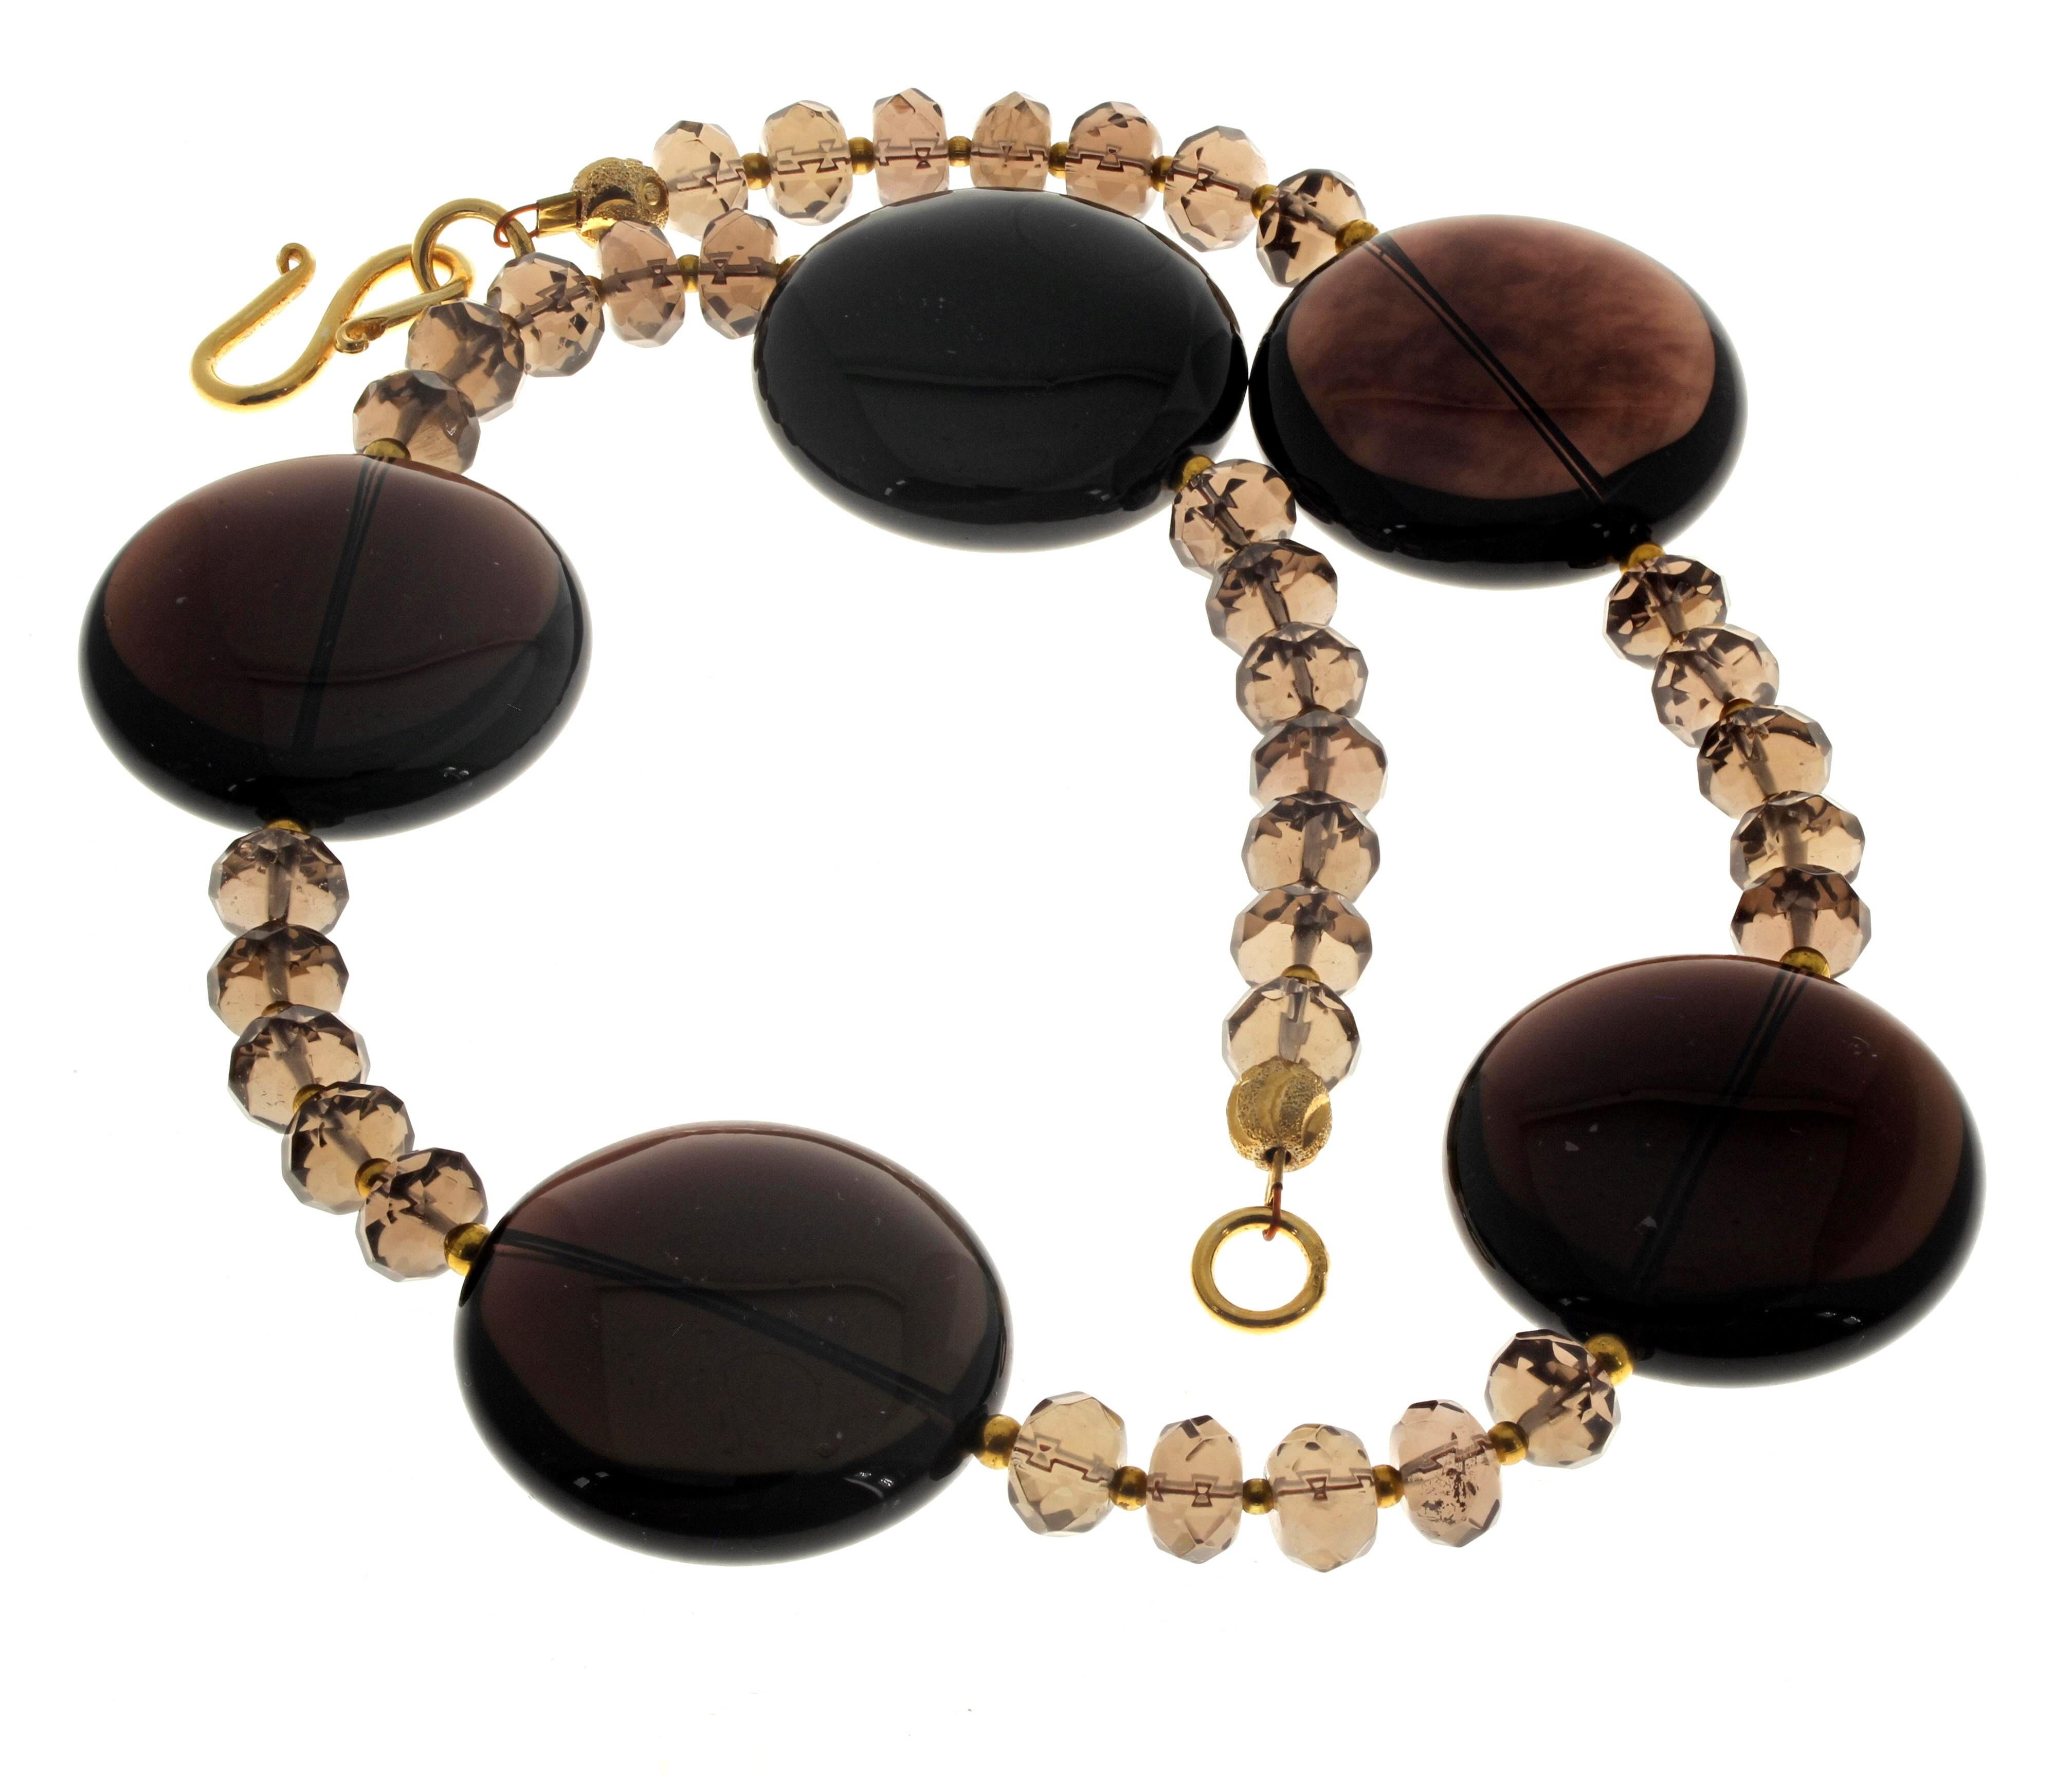 This simple elegant Natural Smoky Quartz necklace is 17 inches long.  The large round statement ones are 30mm across x 10mm thick and the glittering gem cut lighter Smoky Quartz are approximately 8mm x 5mm.  The clasp is an easy to use gold plated